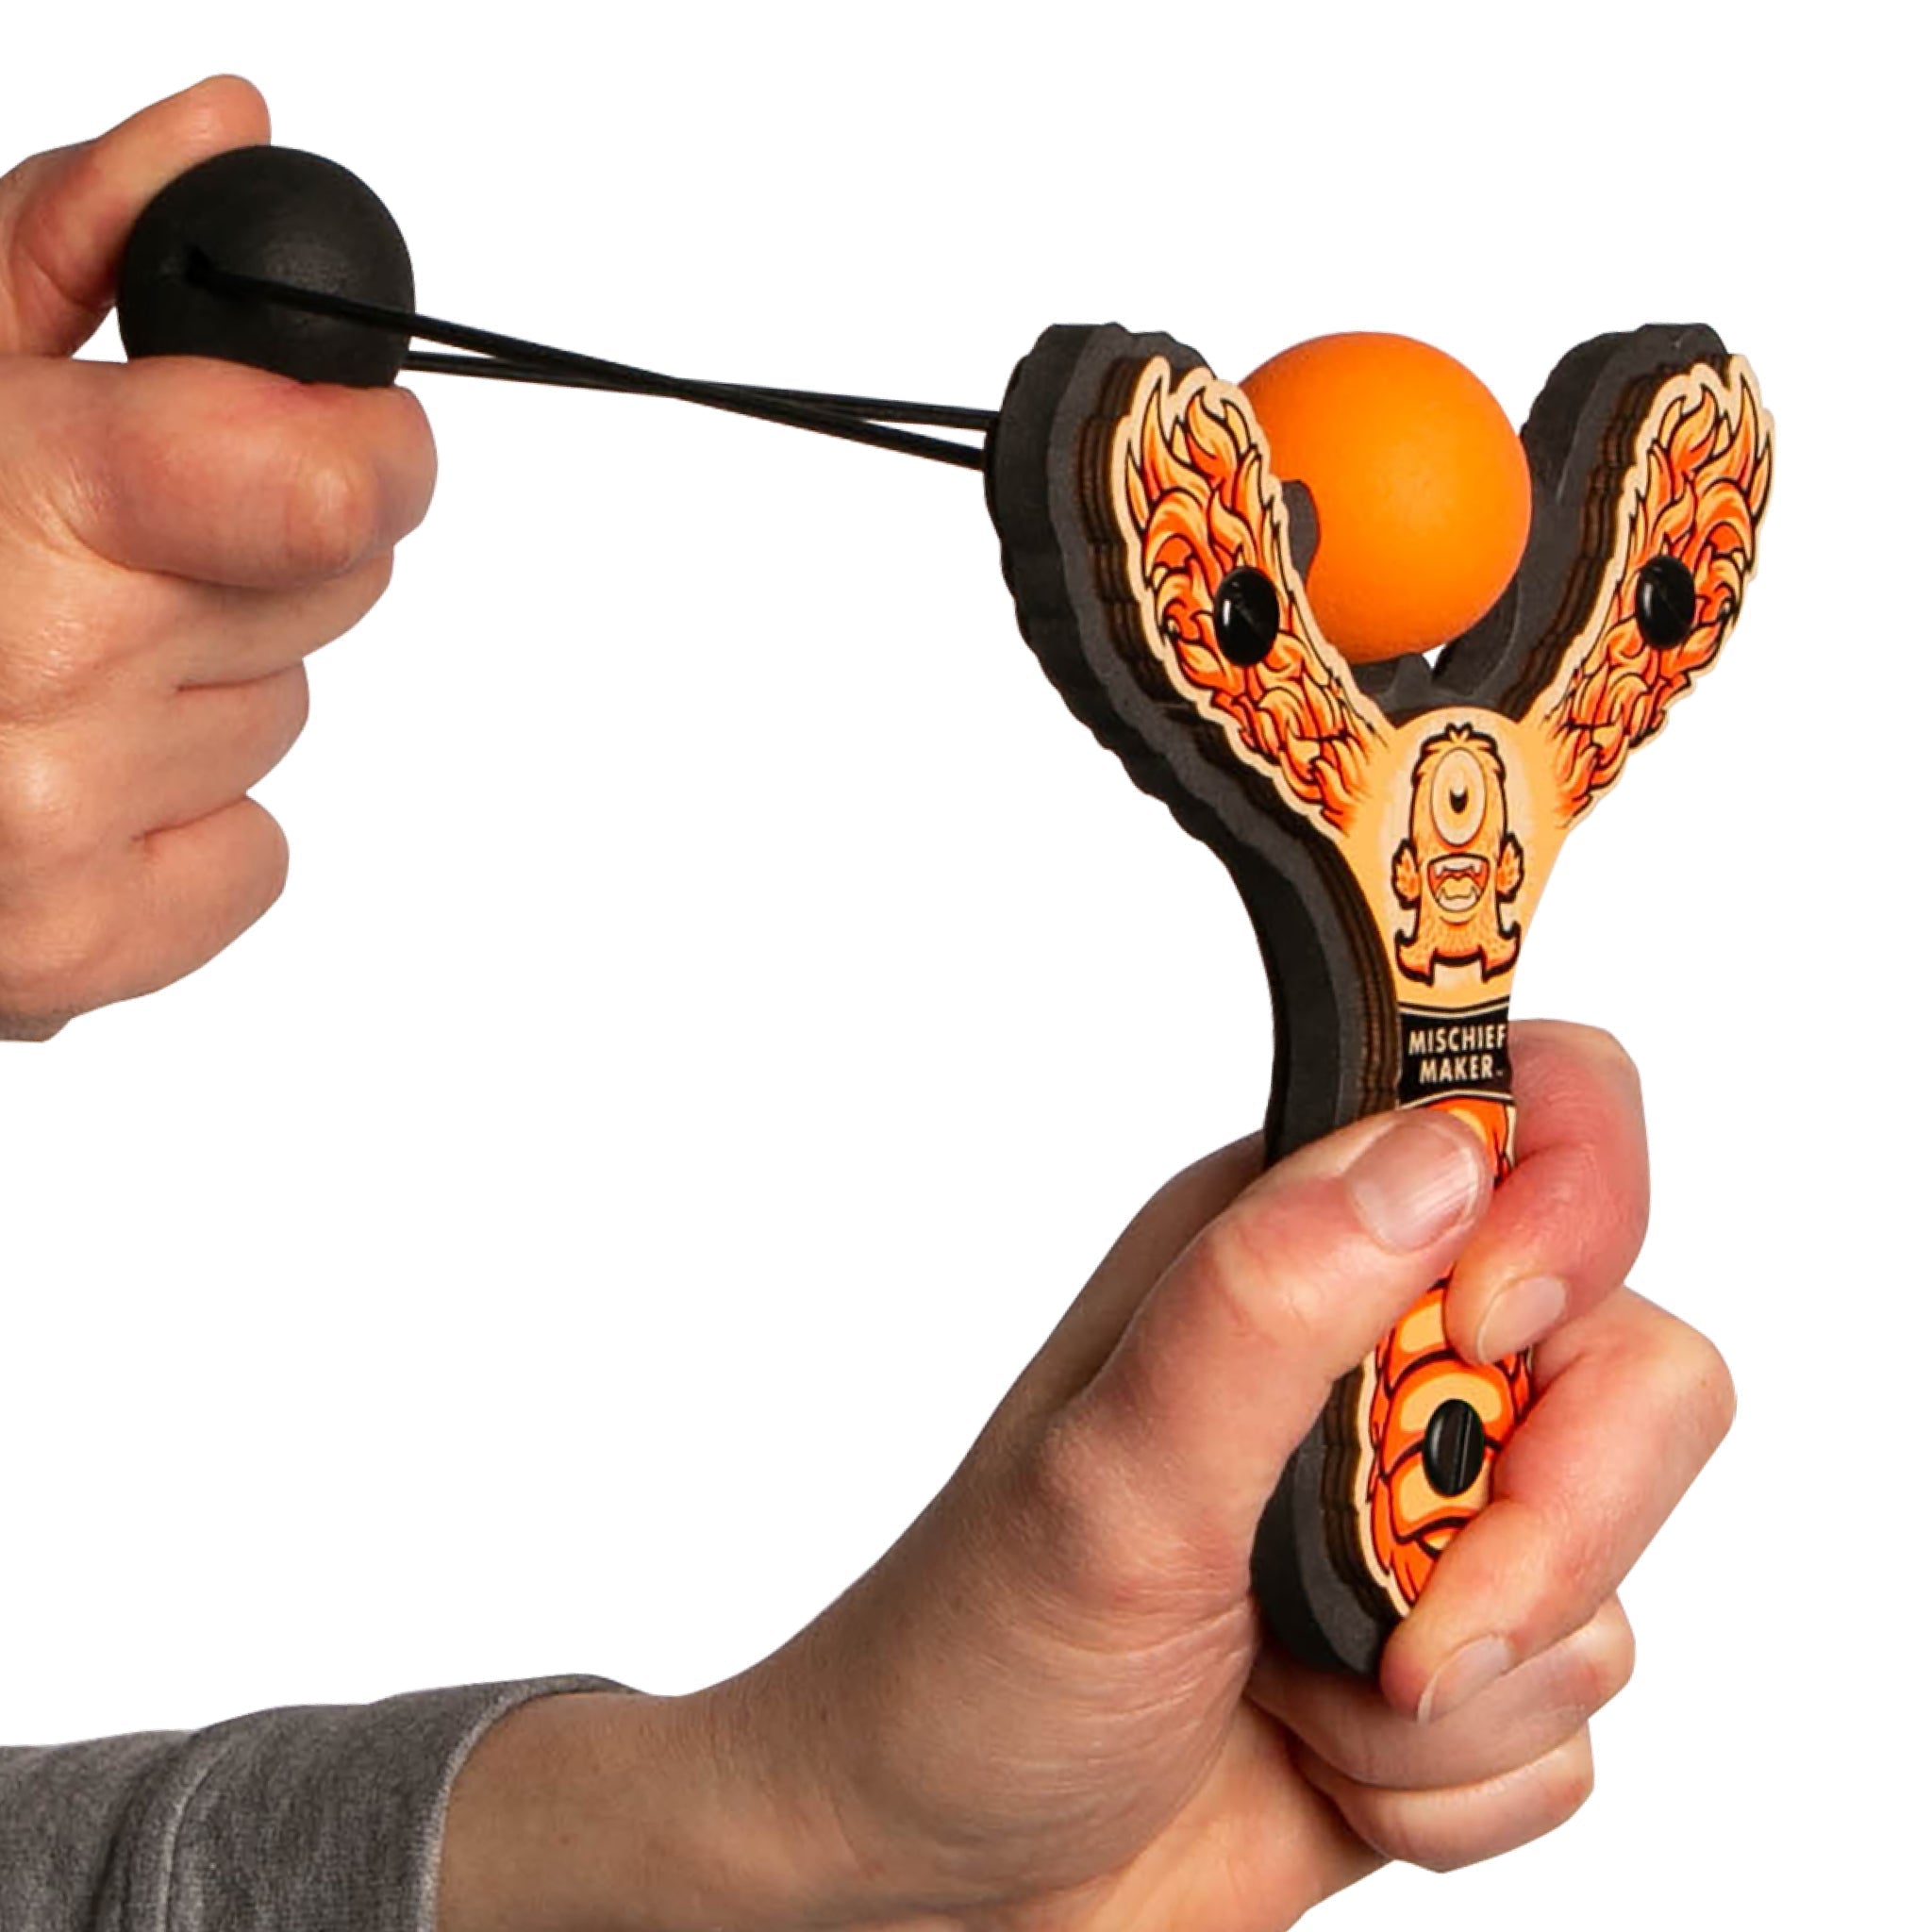 Orange Monster toy slingshot being launched. Mischief Maker by Mighty Fun!